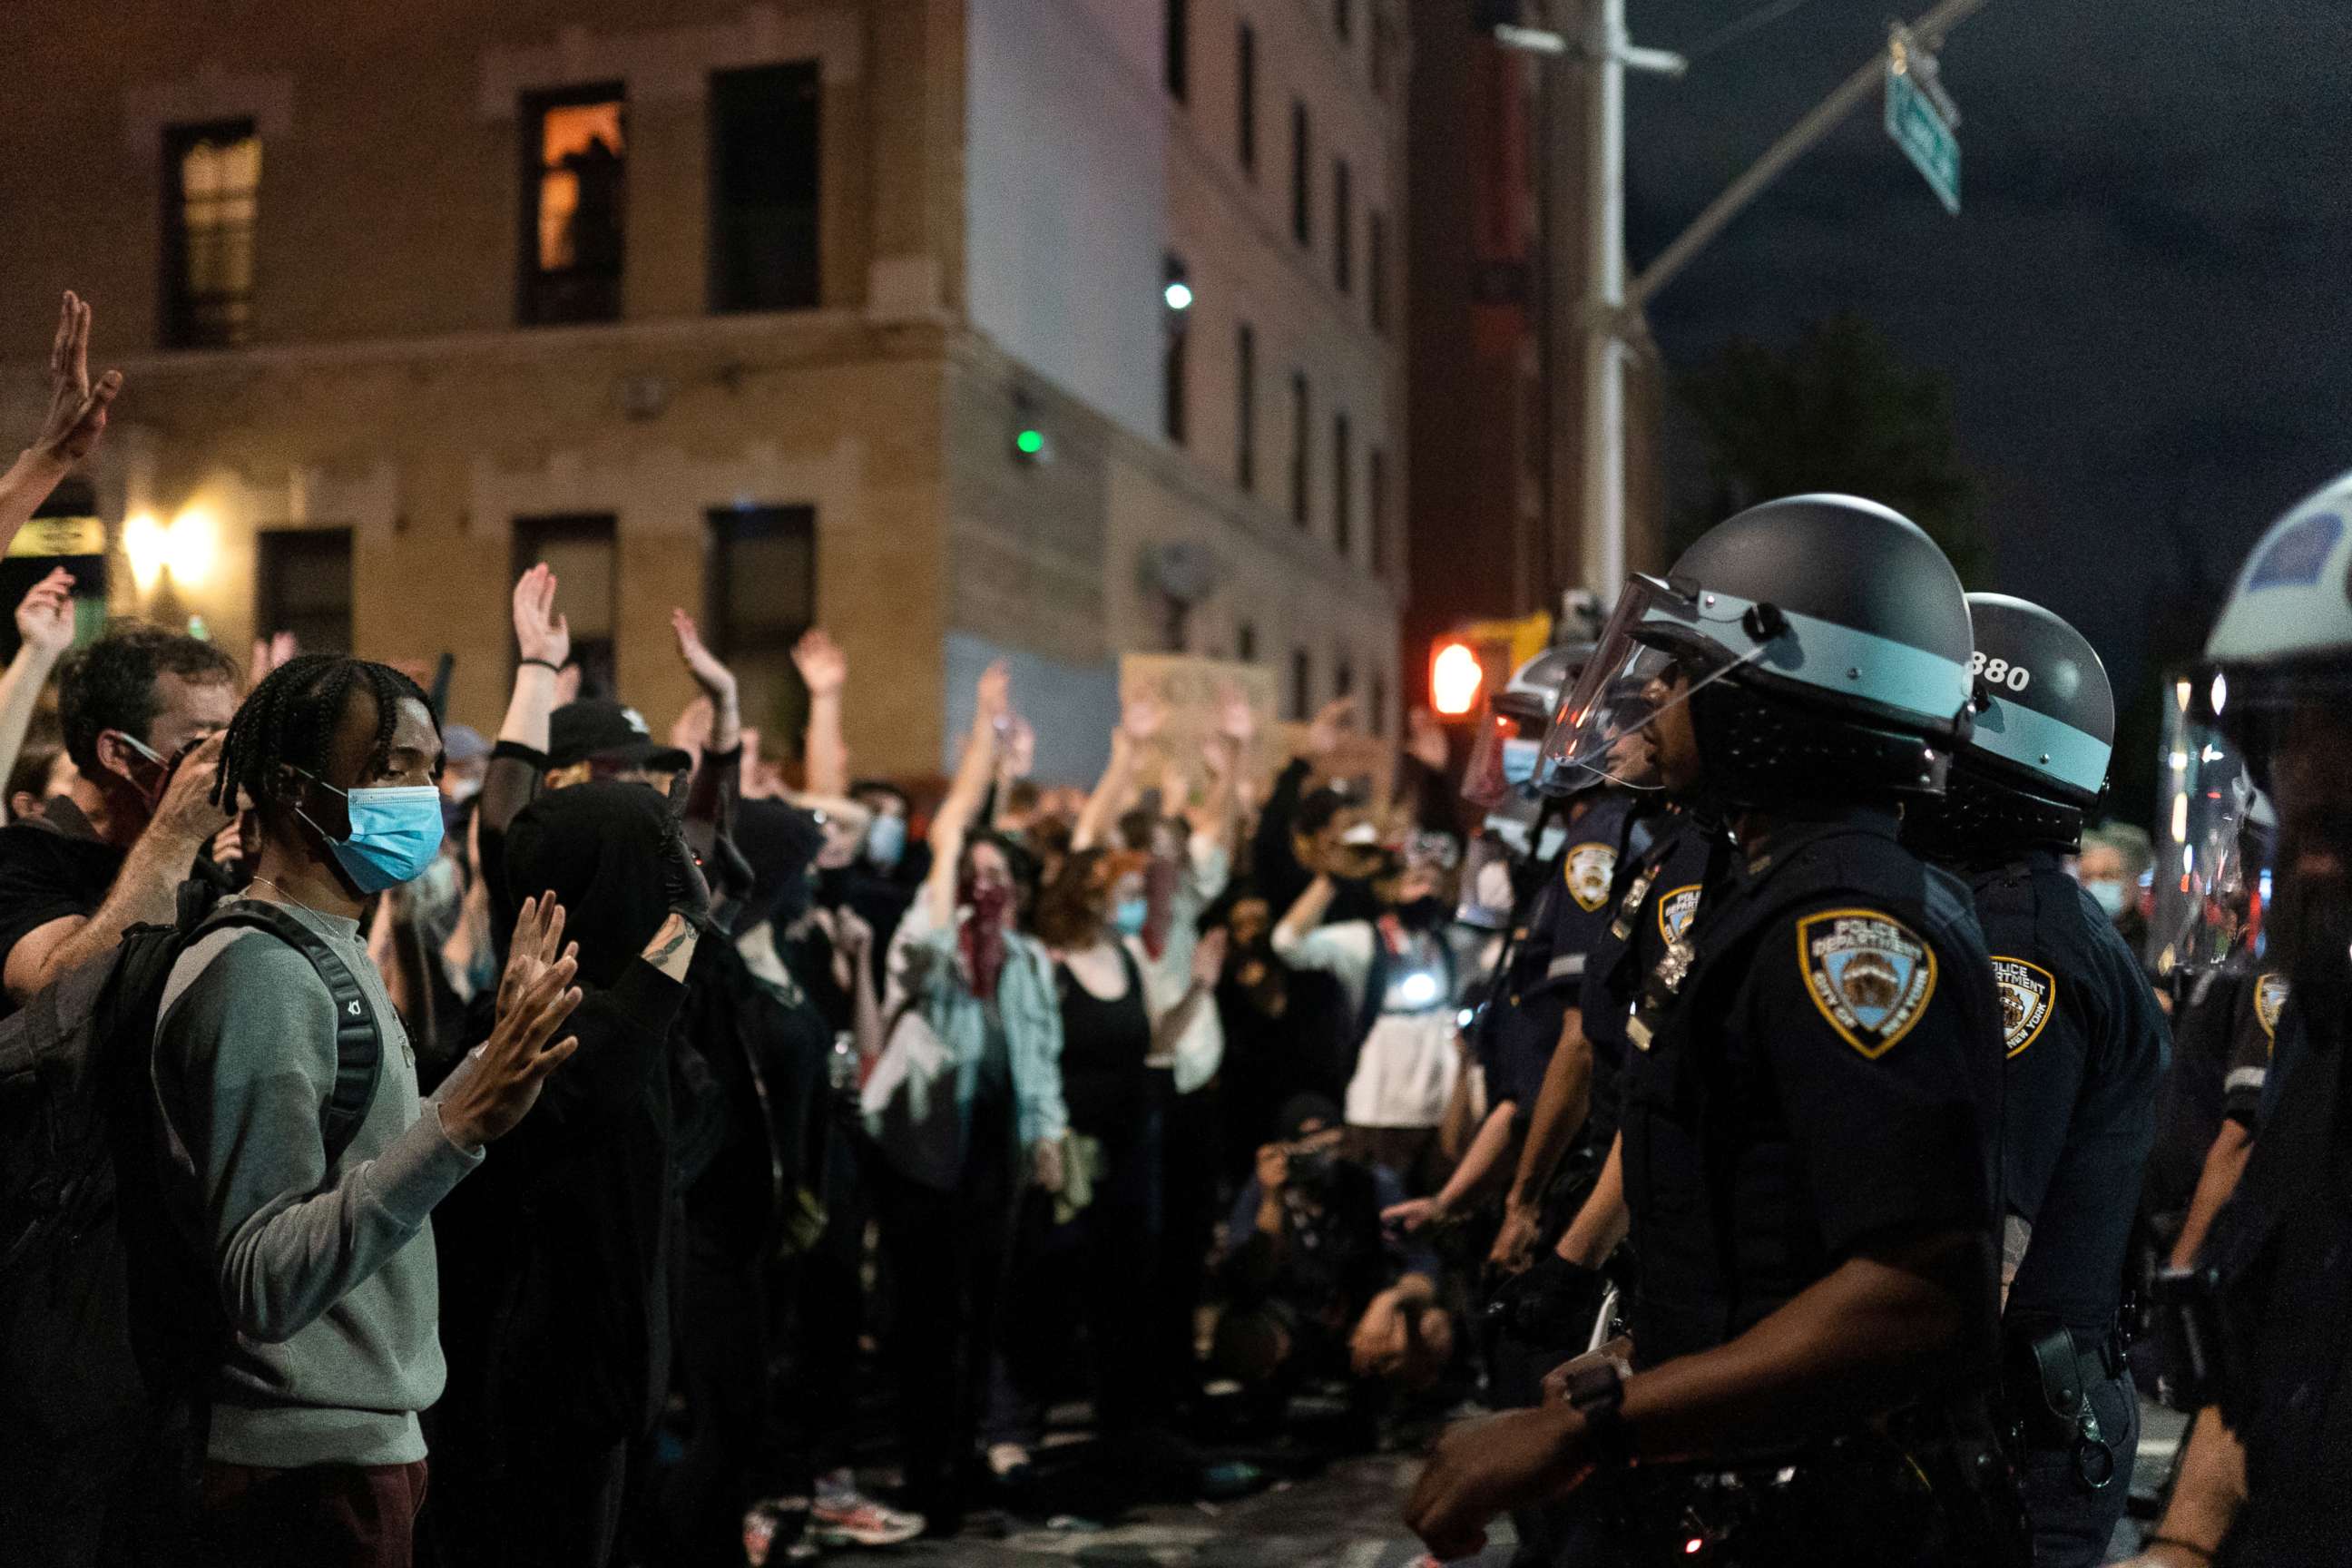 PHOTO: A protester raises his arms during a march against the death in Minneapolis police custody of George Floyd, in Brooklyn, New York, May 30, 2020.